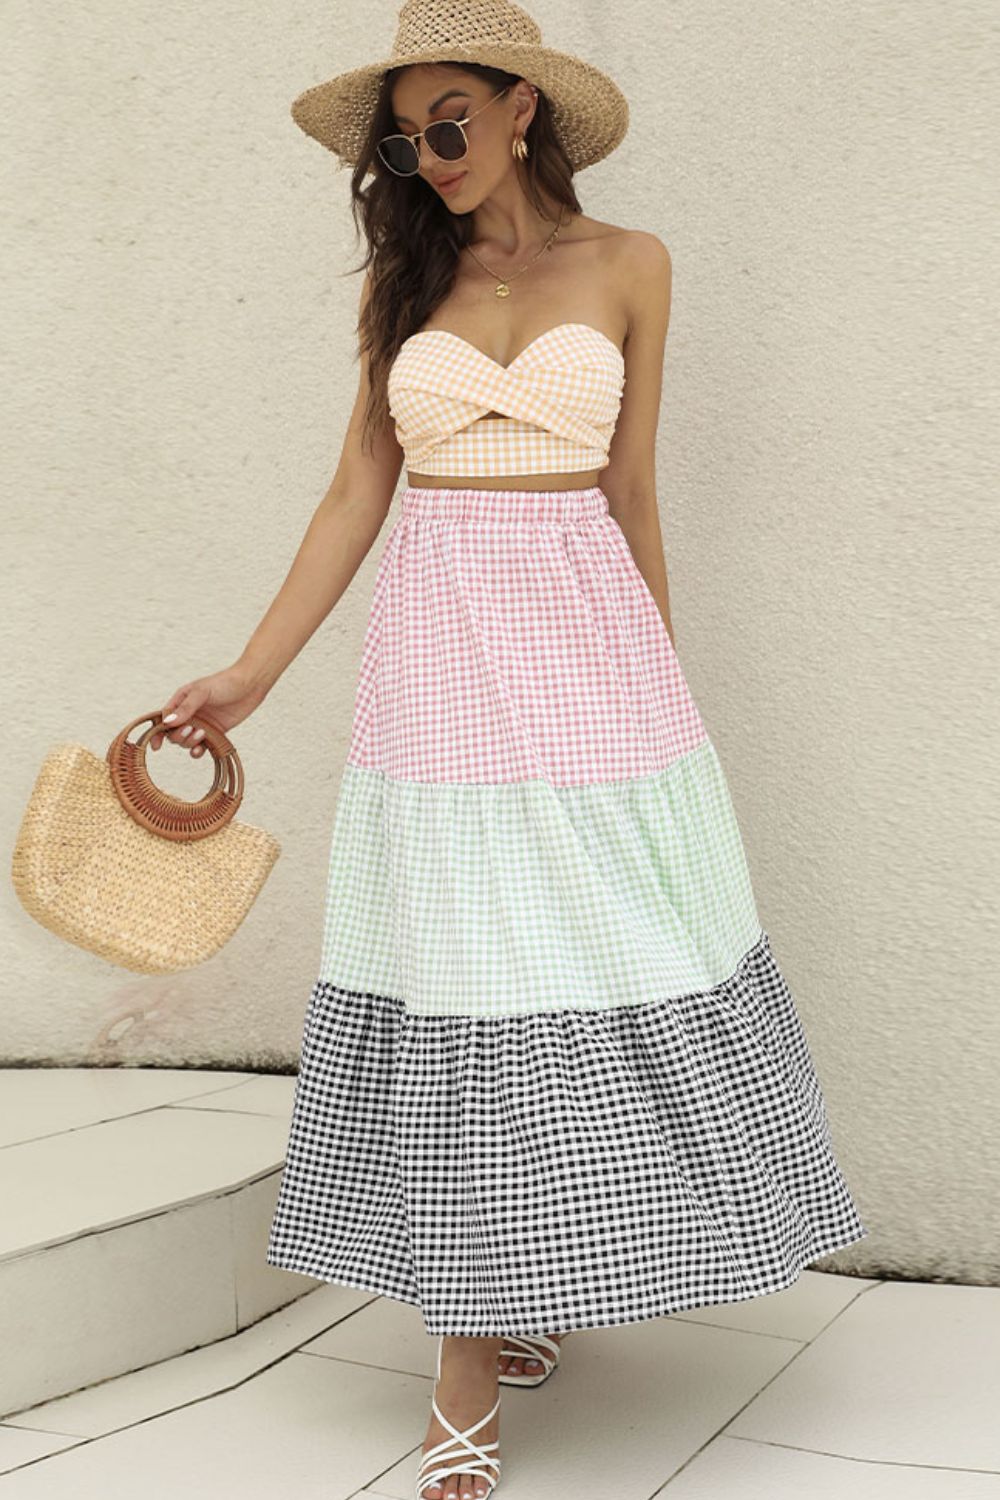 Picnics in Paradise Plaid Strapless Top and Tiered Skirt Set - Cheeky Chic Boutique